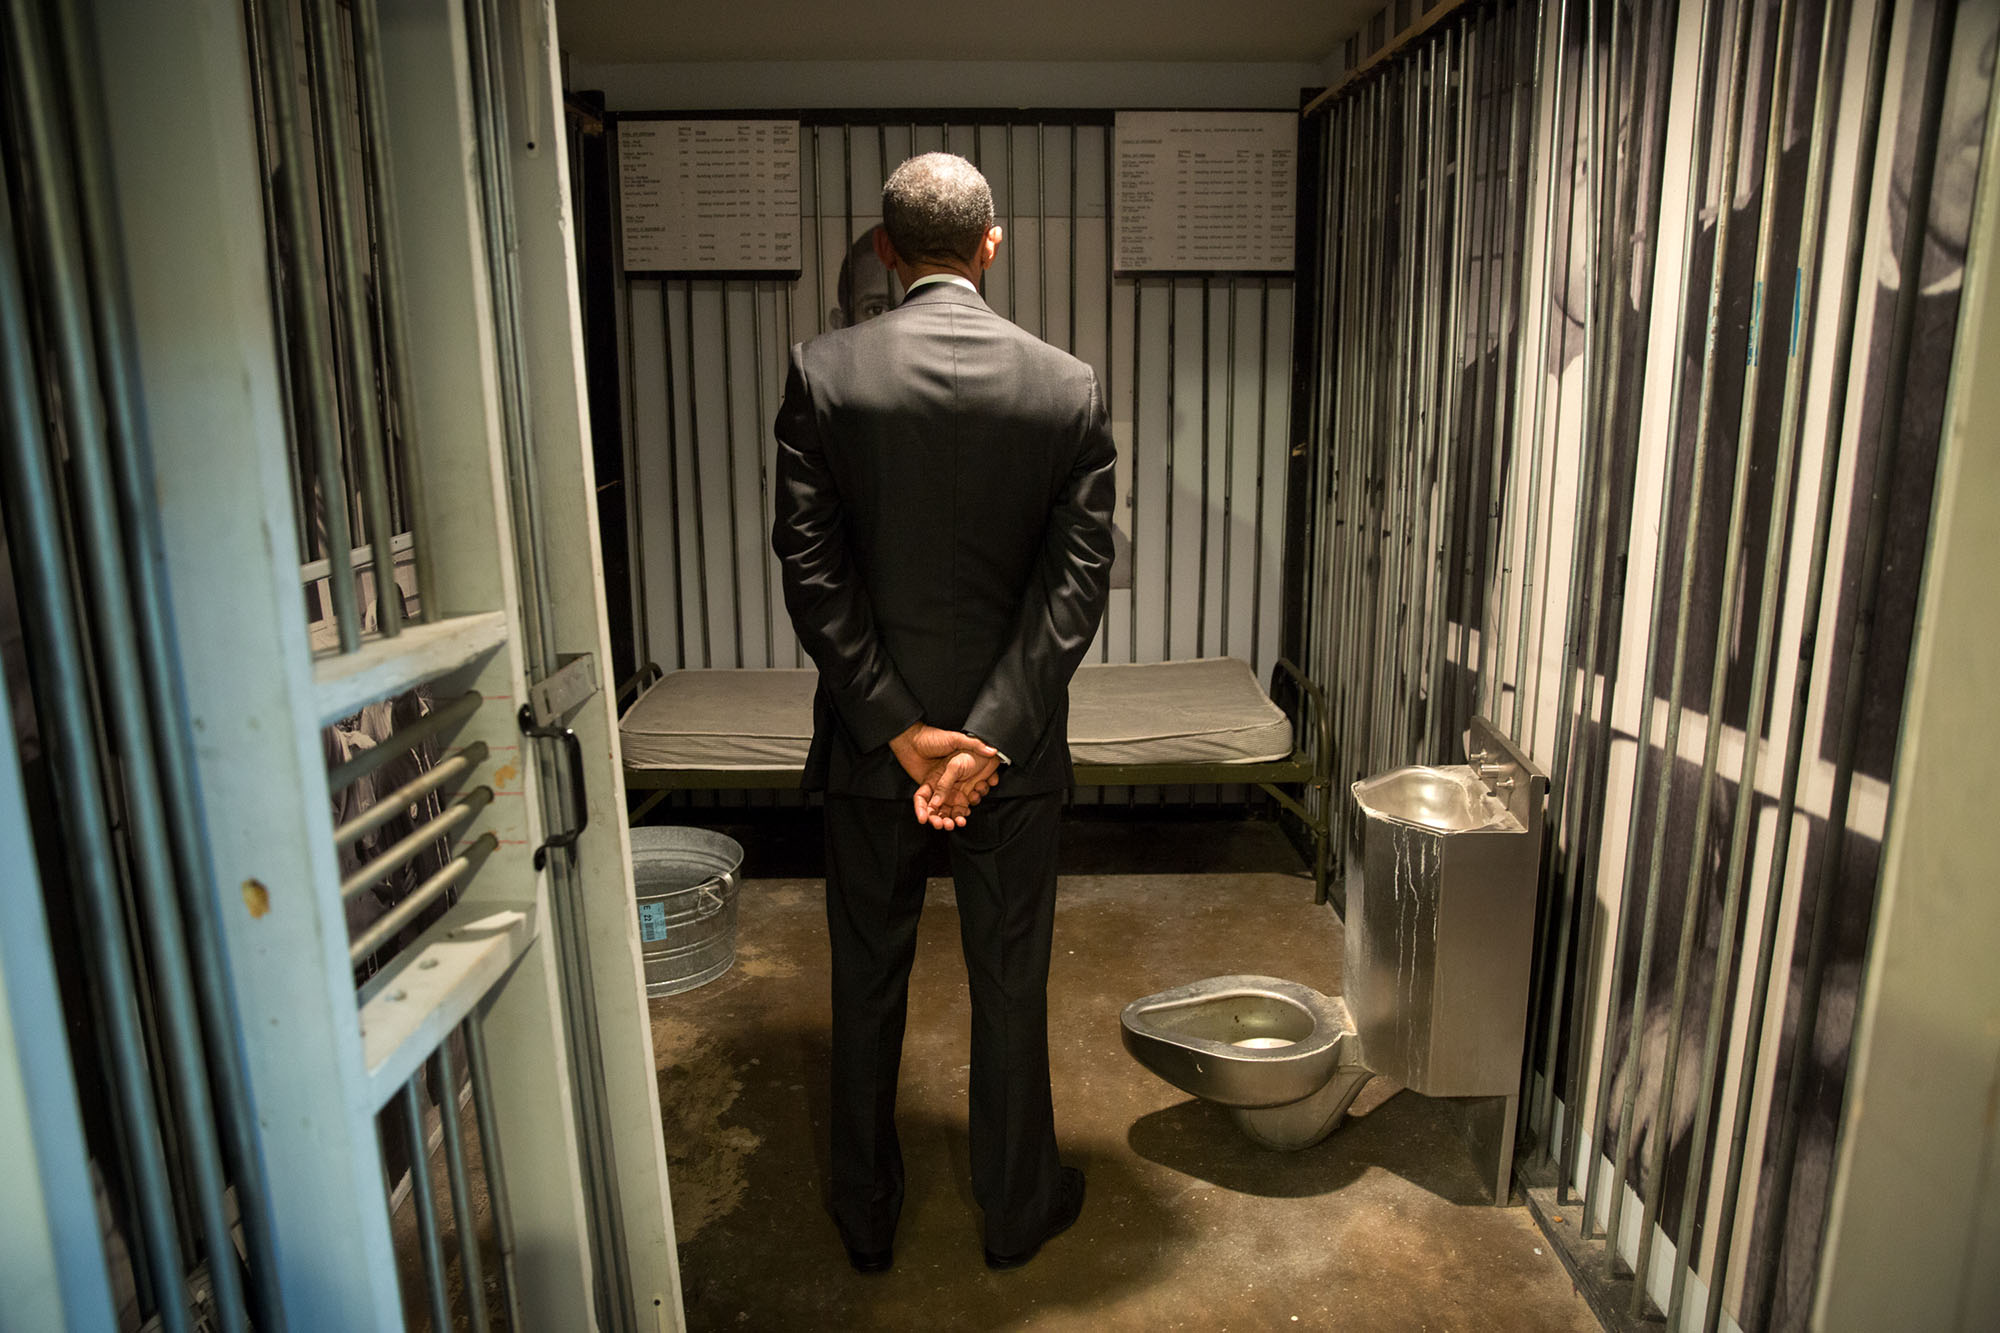 The President stands inside a replica prison cell at the museum. (Official White House Photo by Pete Souza)